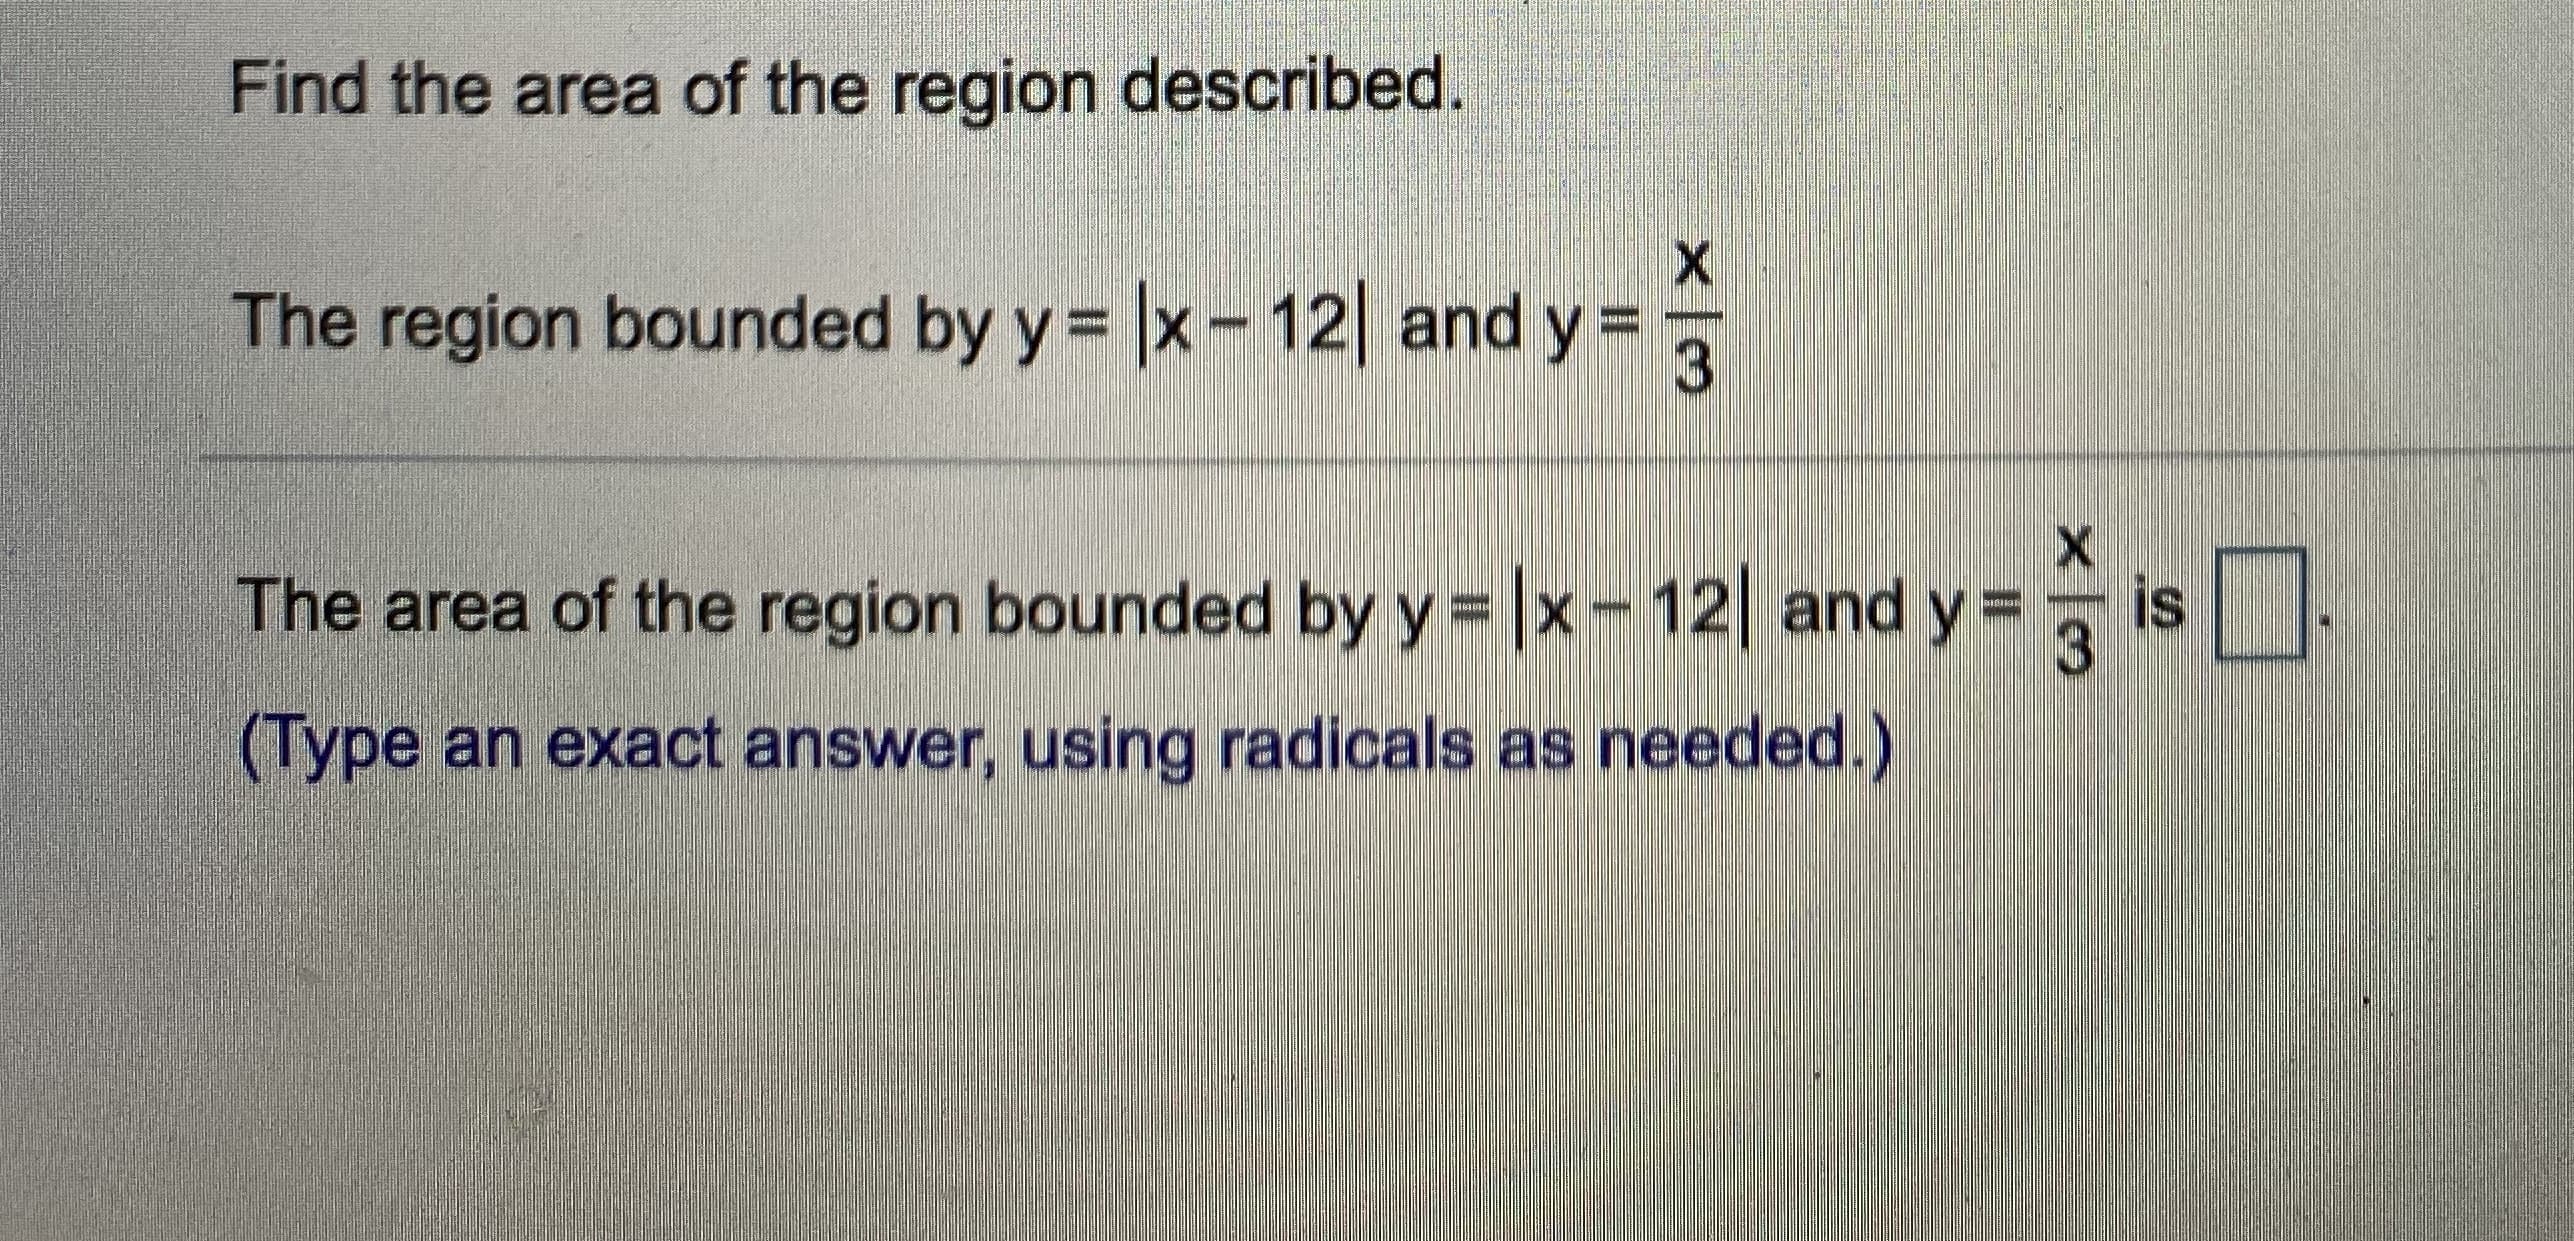 Find the area of the region described.
The region bounded by y= |x-12 and y =
3
The area of the region bounded by y= |x-12 and y =
is
3
